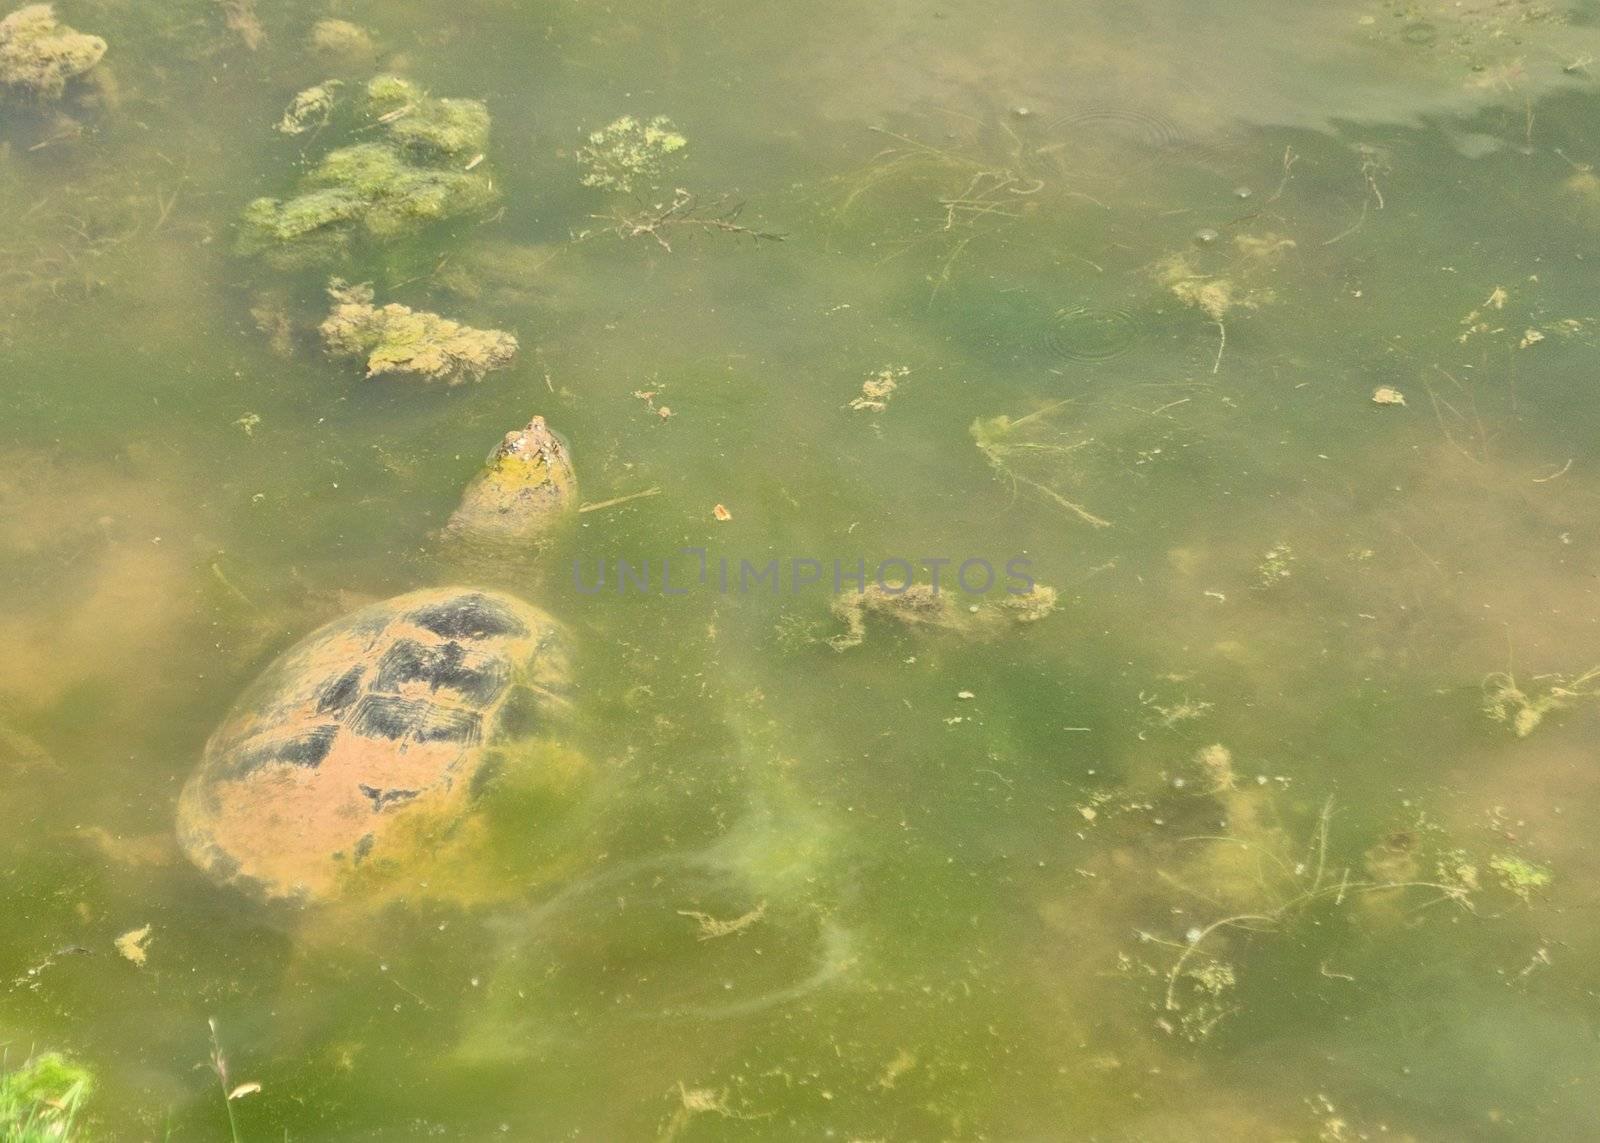 Snapping Turtle in muddy swamp floating near the surface.